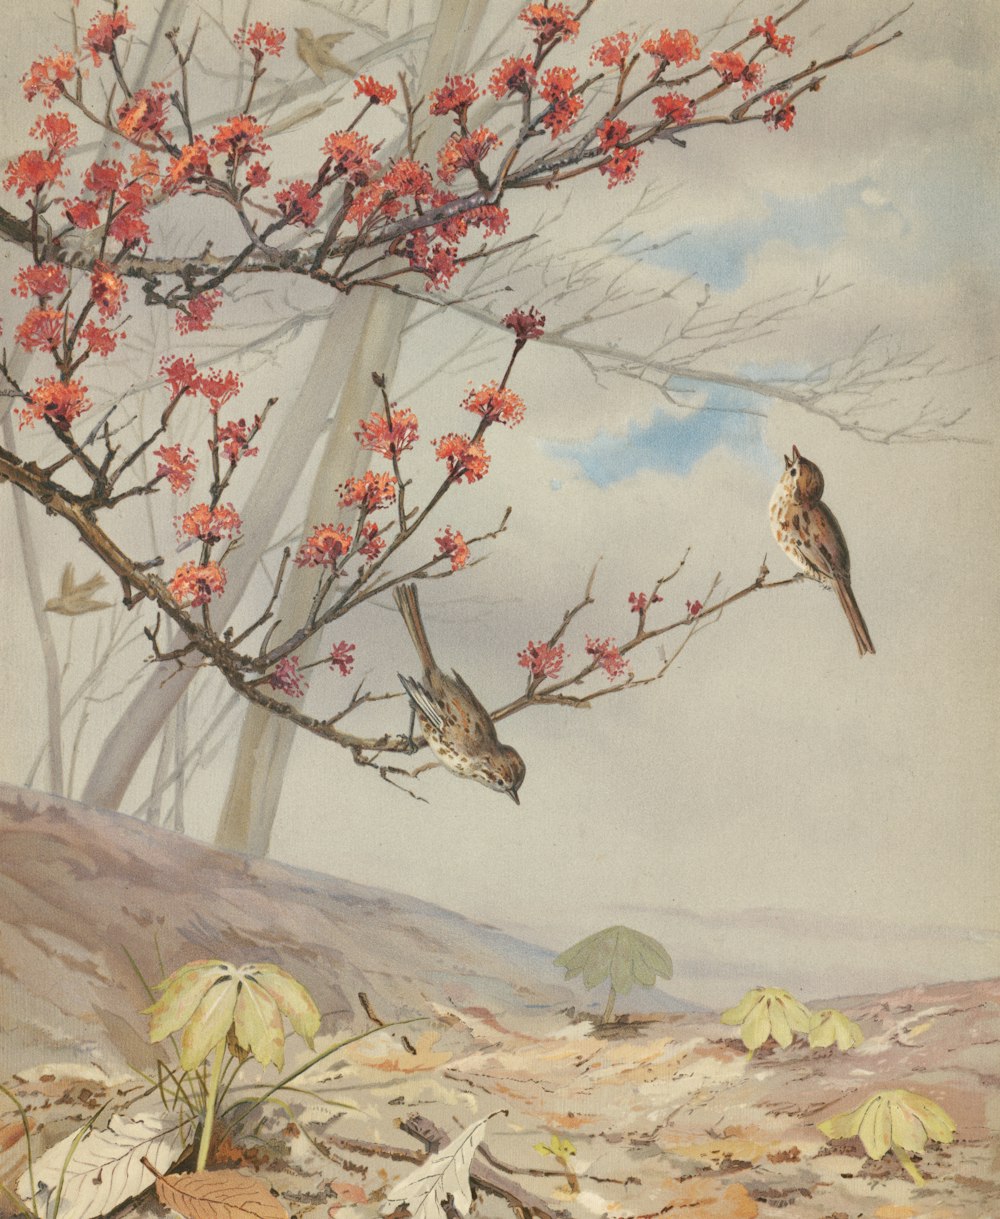 a painting of two birds sitting on a tree branch